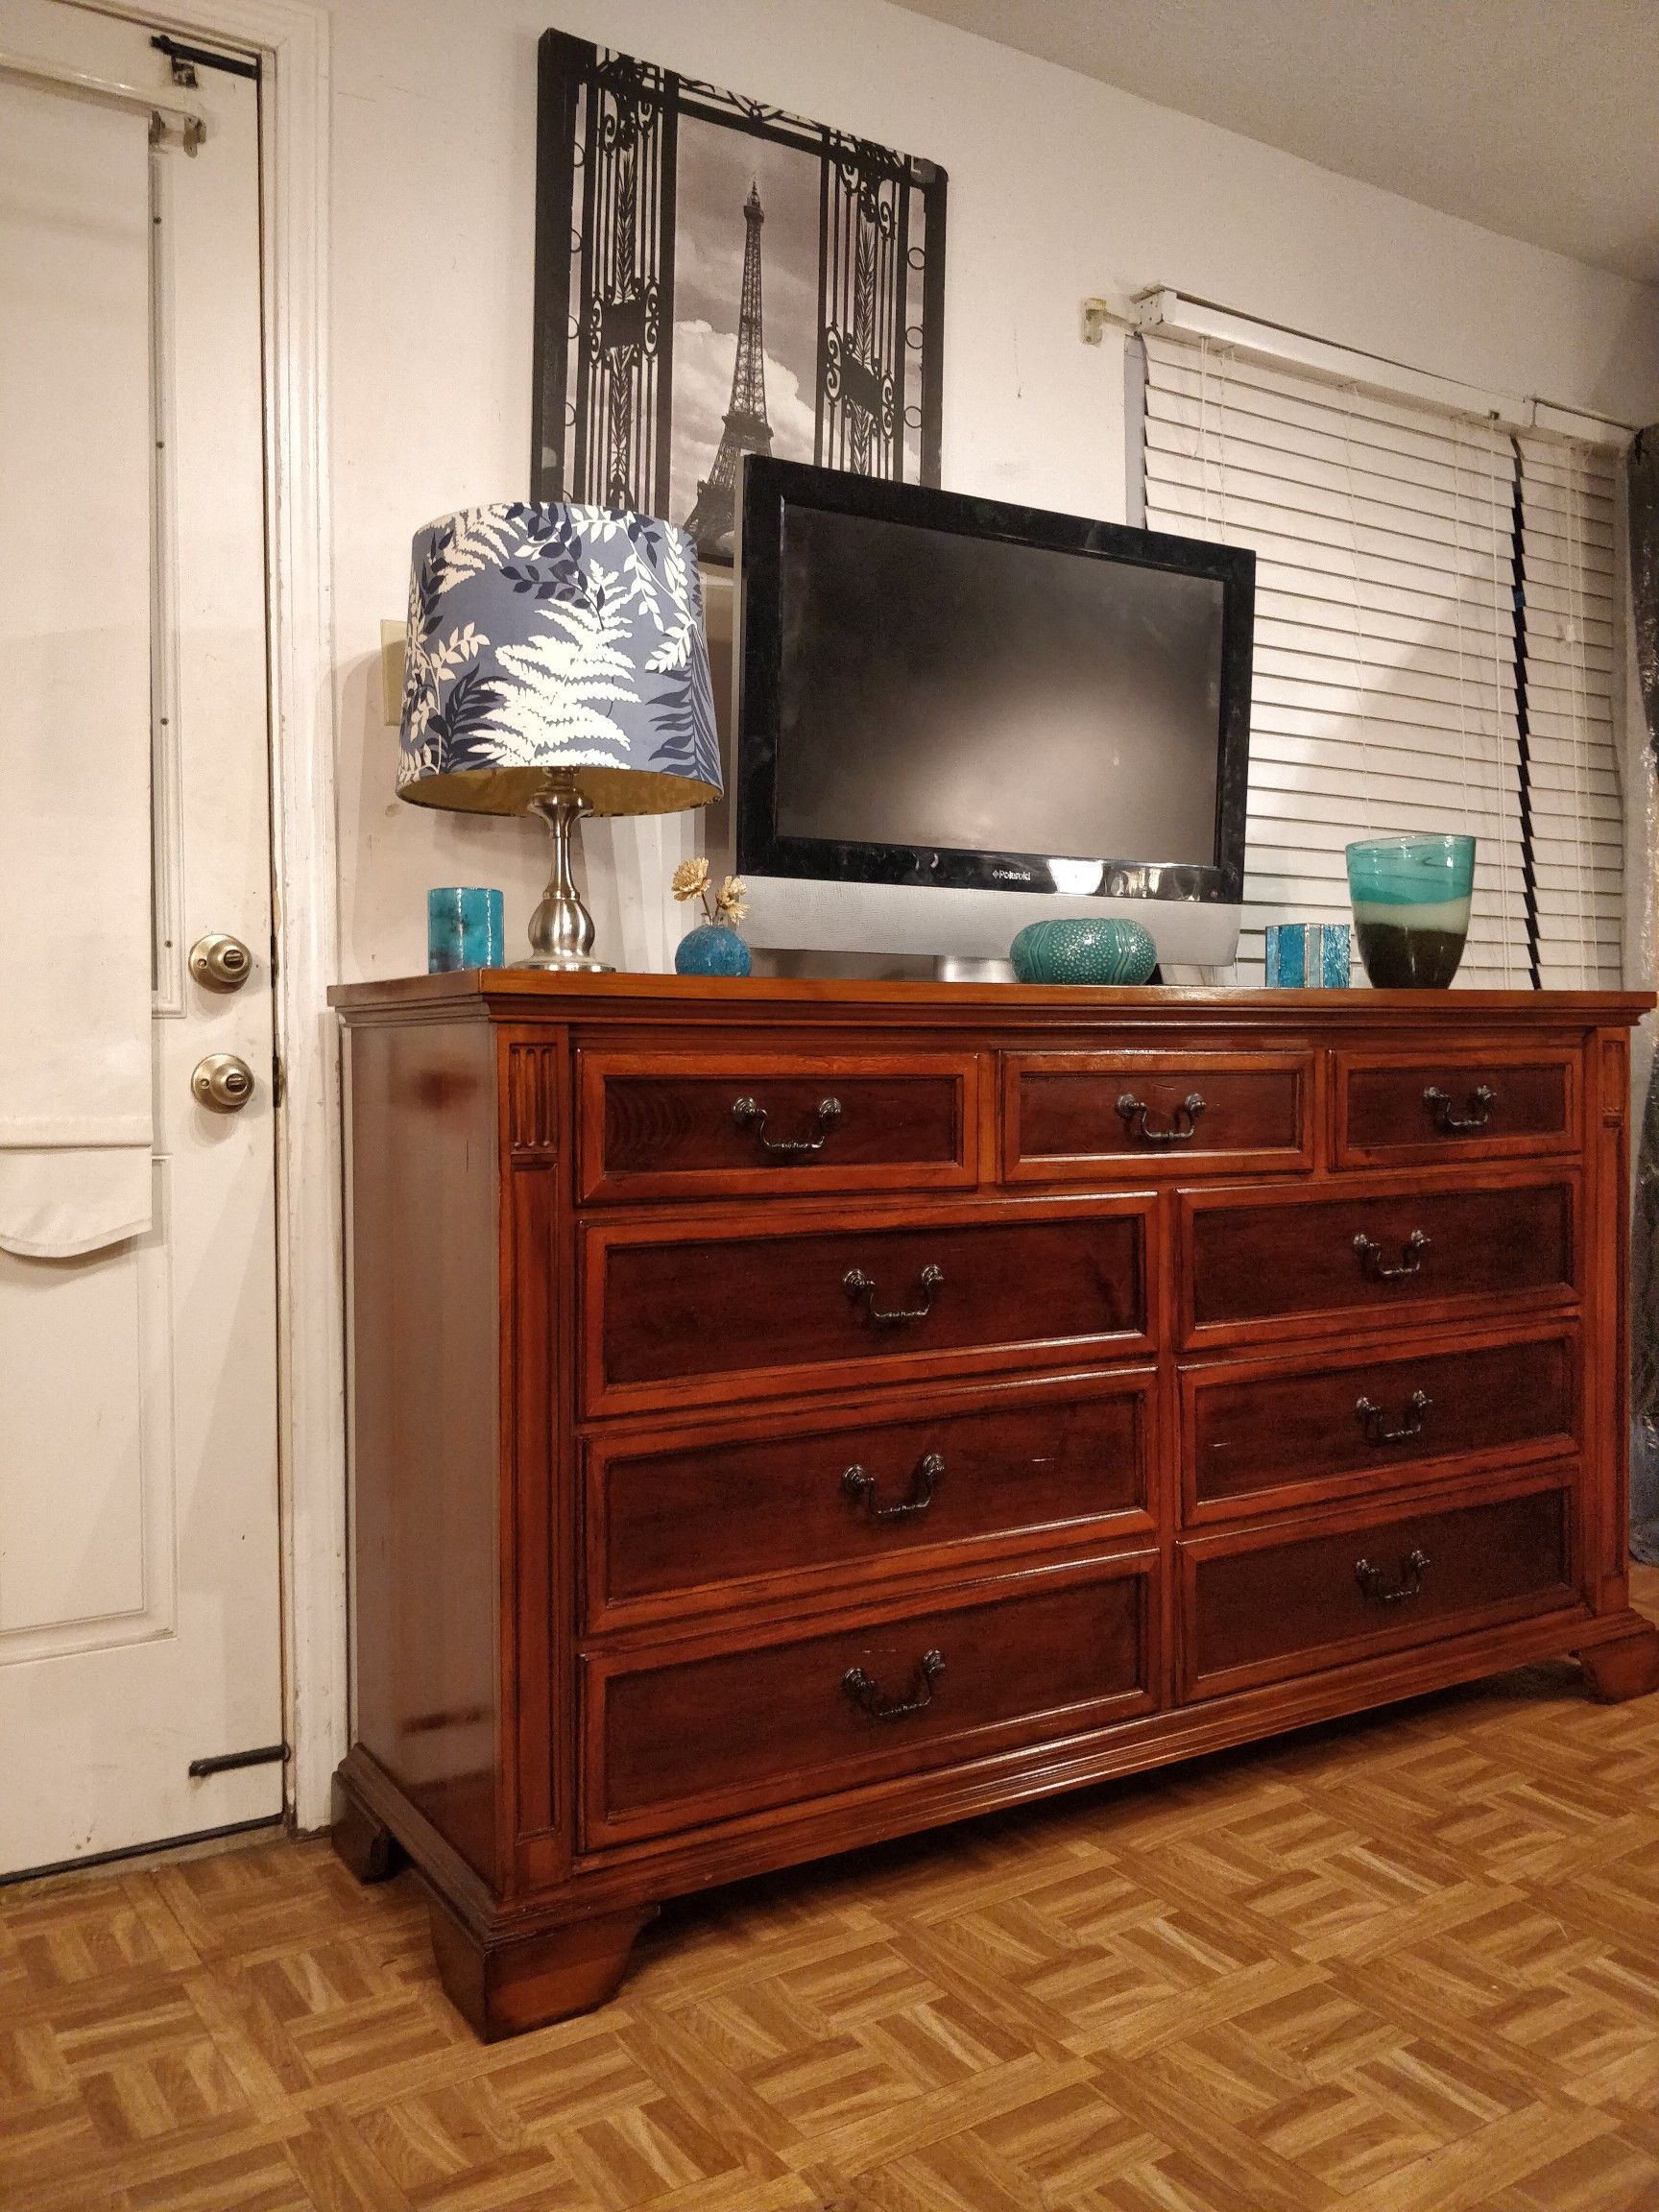 Solid wood UNIVERSAL FURNITURE big dresser/TV stand with 9 drawers in great condition all drawers working well, dovetail drawers, ,